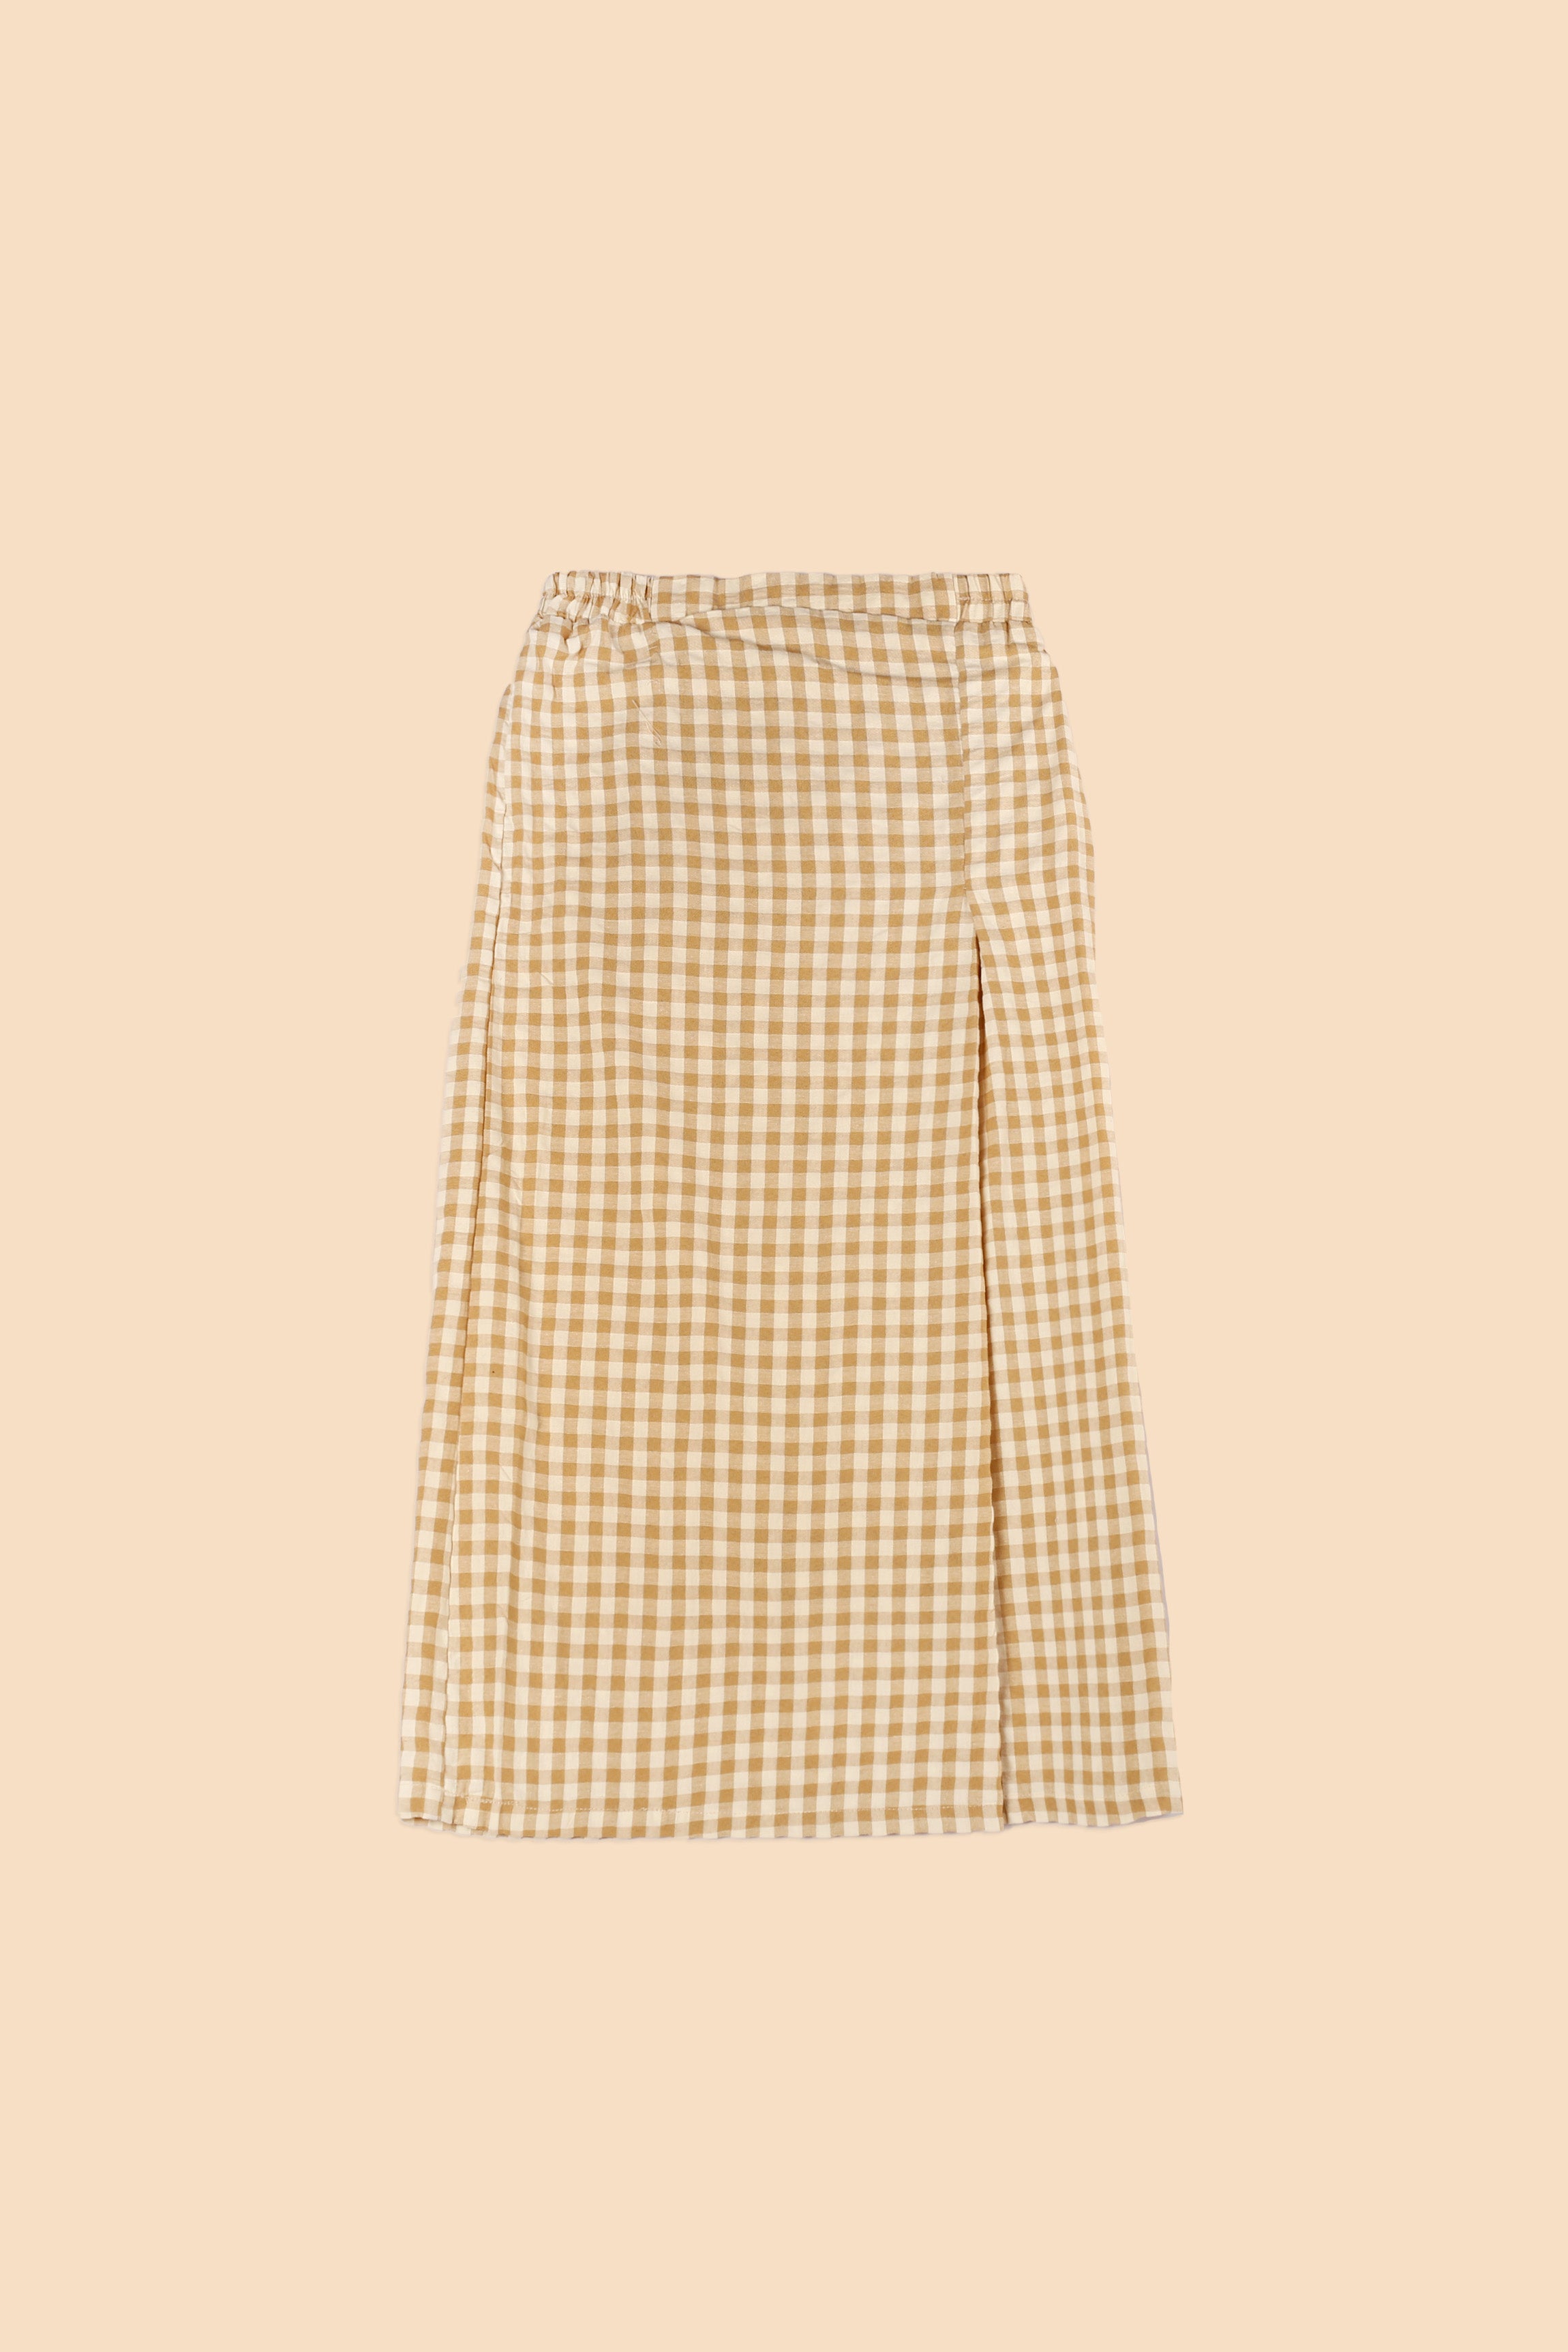 folded long skirt checked print casual wear